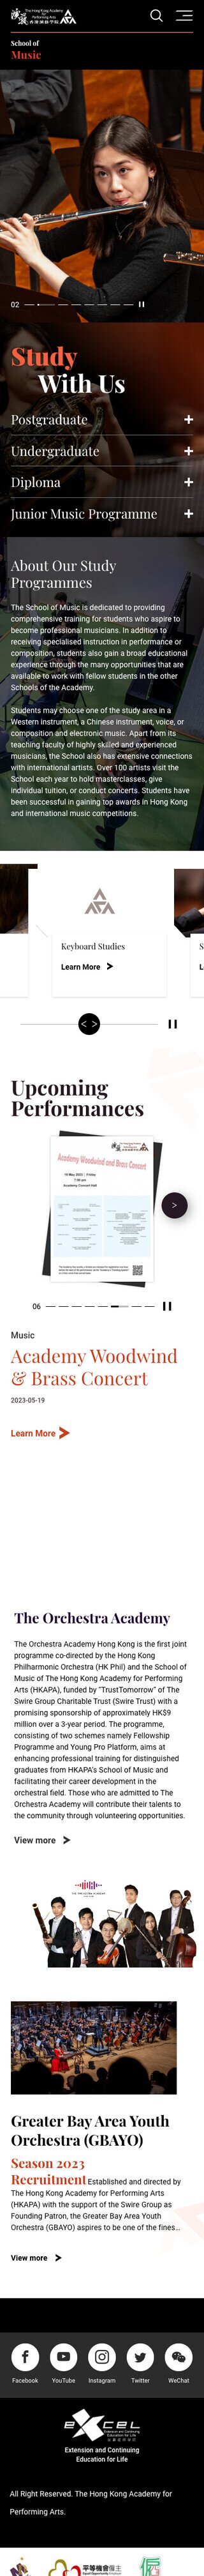 Hong Kong Academy for Performing Arts website screenshot for mobile version 2 of 5